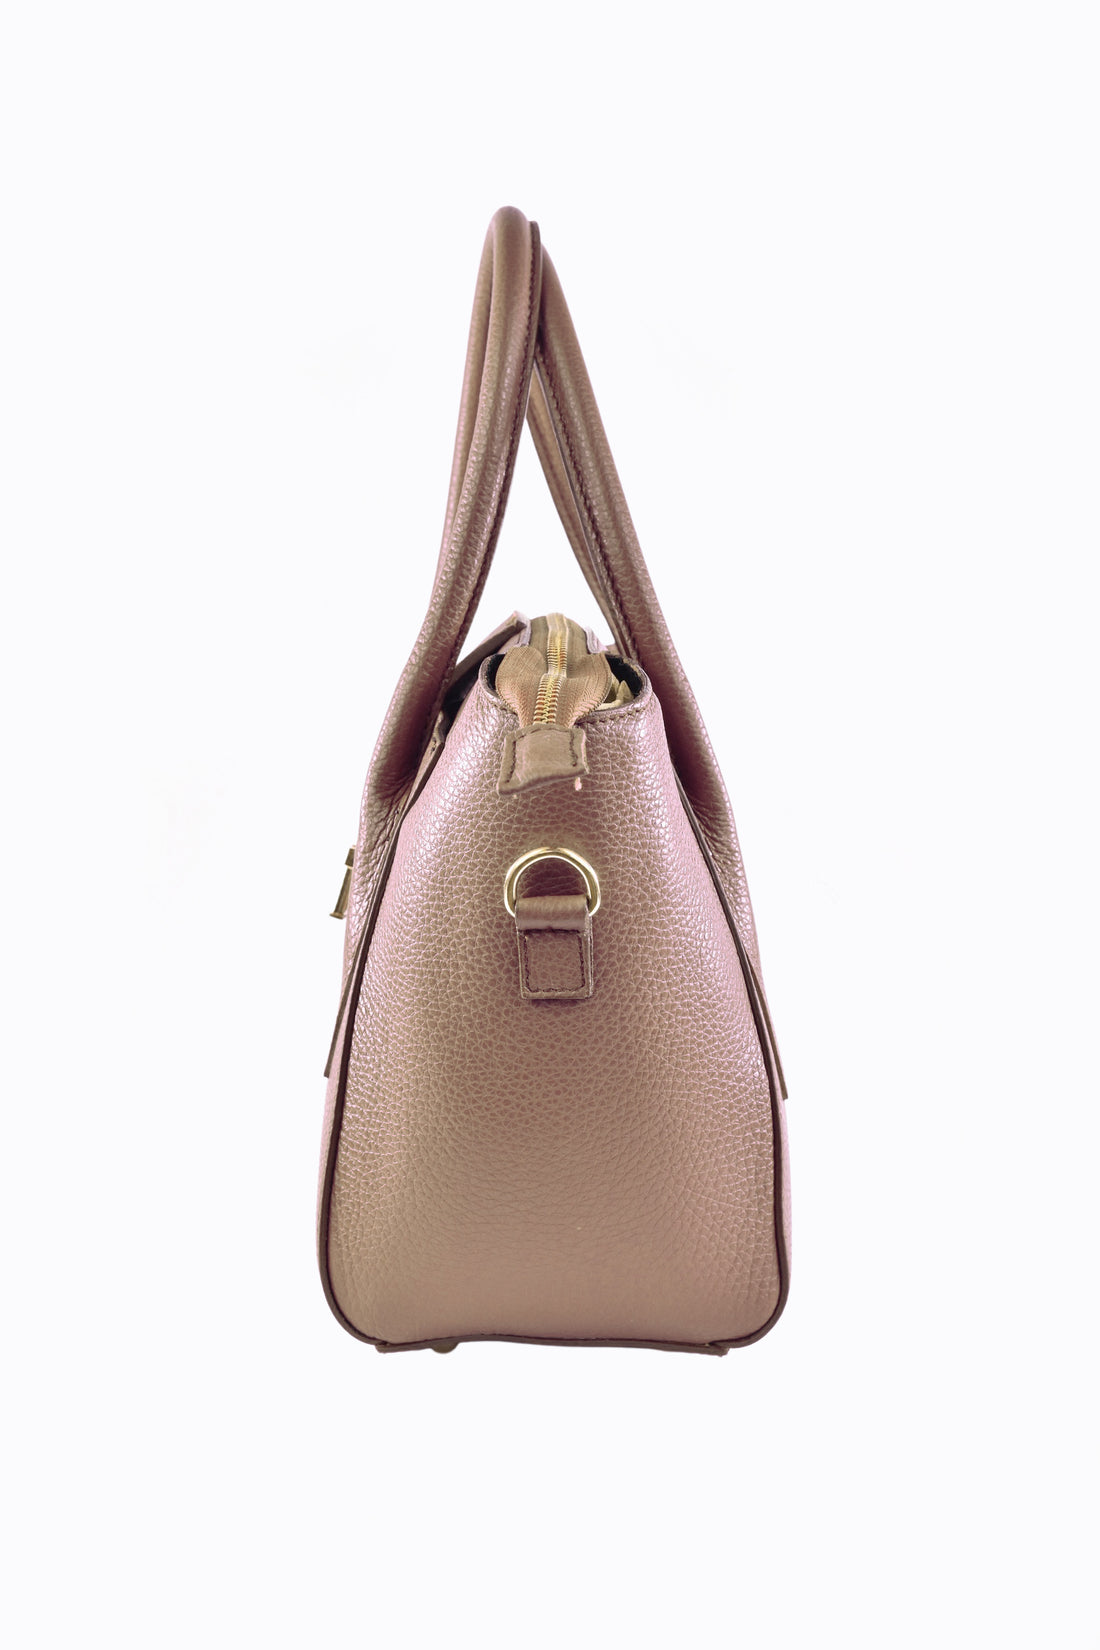 Kylie bag in Dollar Taupe leather